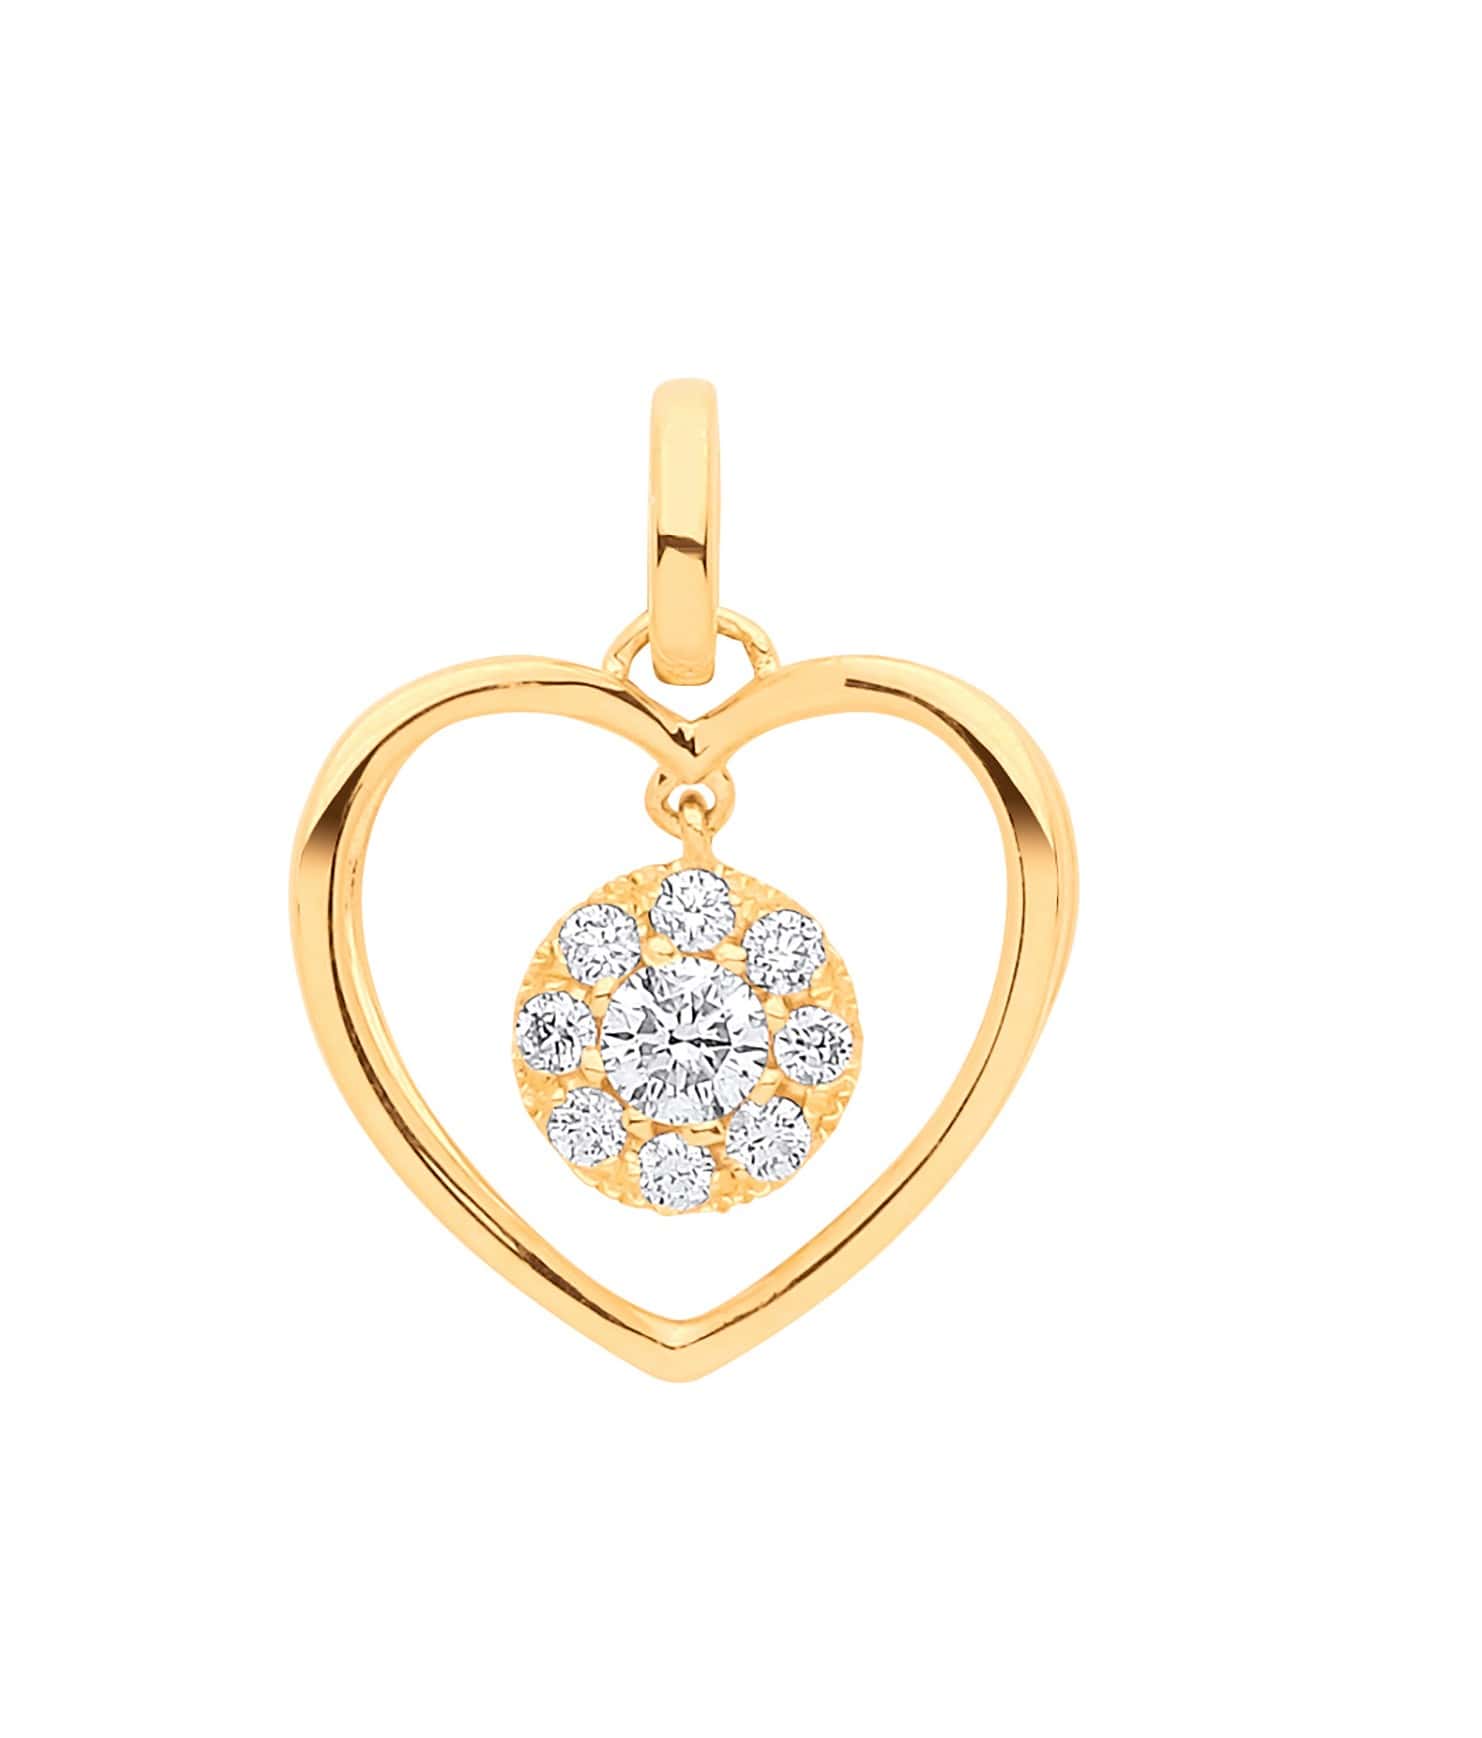 0.30 Carat Natural Round Diamond With Heart Shaped Pendant